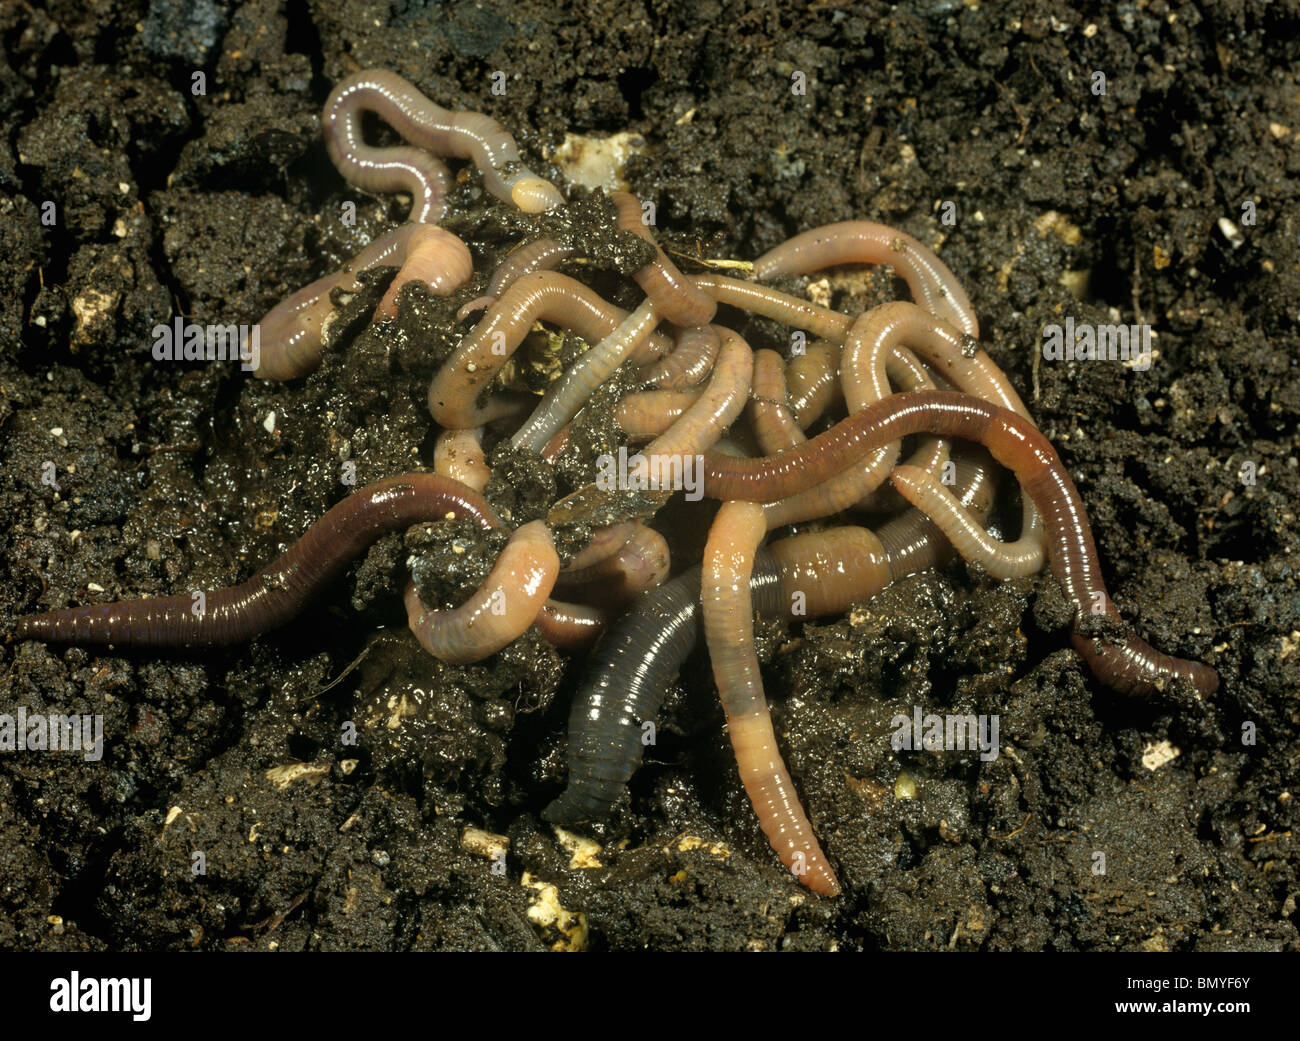 A tangled mass of earthworms on the soil surface Stock Photo